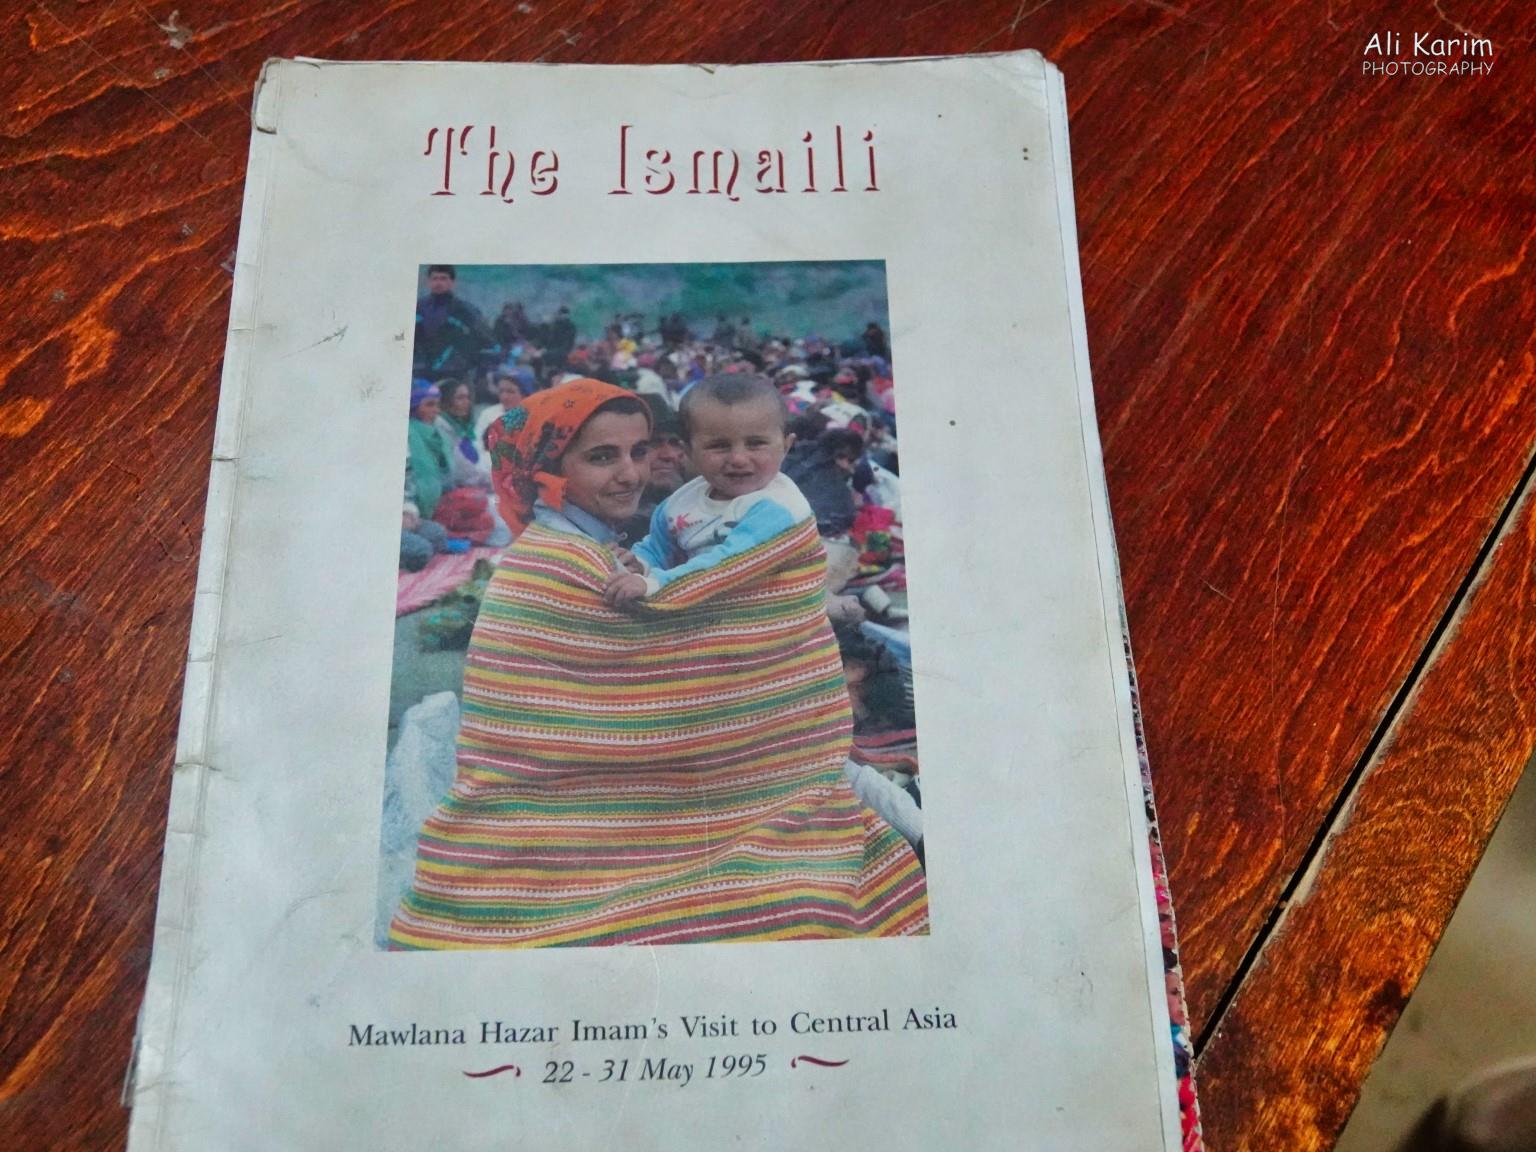 Langar, Bulunkul Tajikistan, This well-worn edition of The Ismaili was a prized collection for Ahmadbek. It is from this magazine that we learned of the Aga Khan’s visit to multiple towns and cities in Central Asia in May, 1995